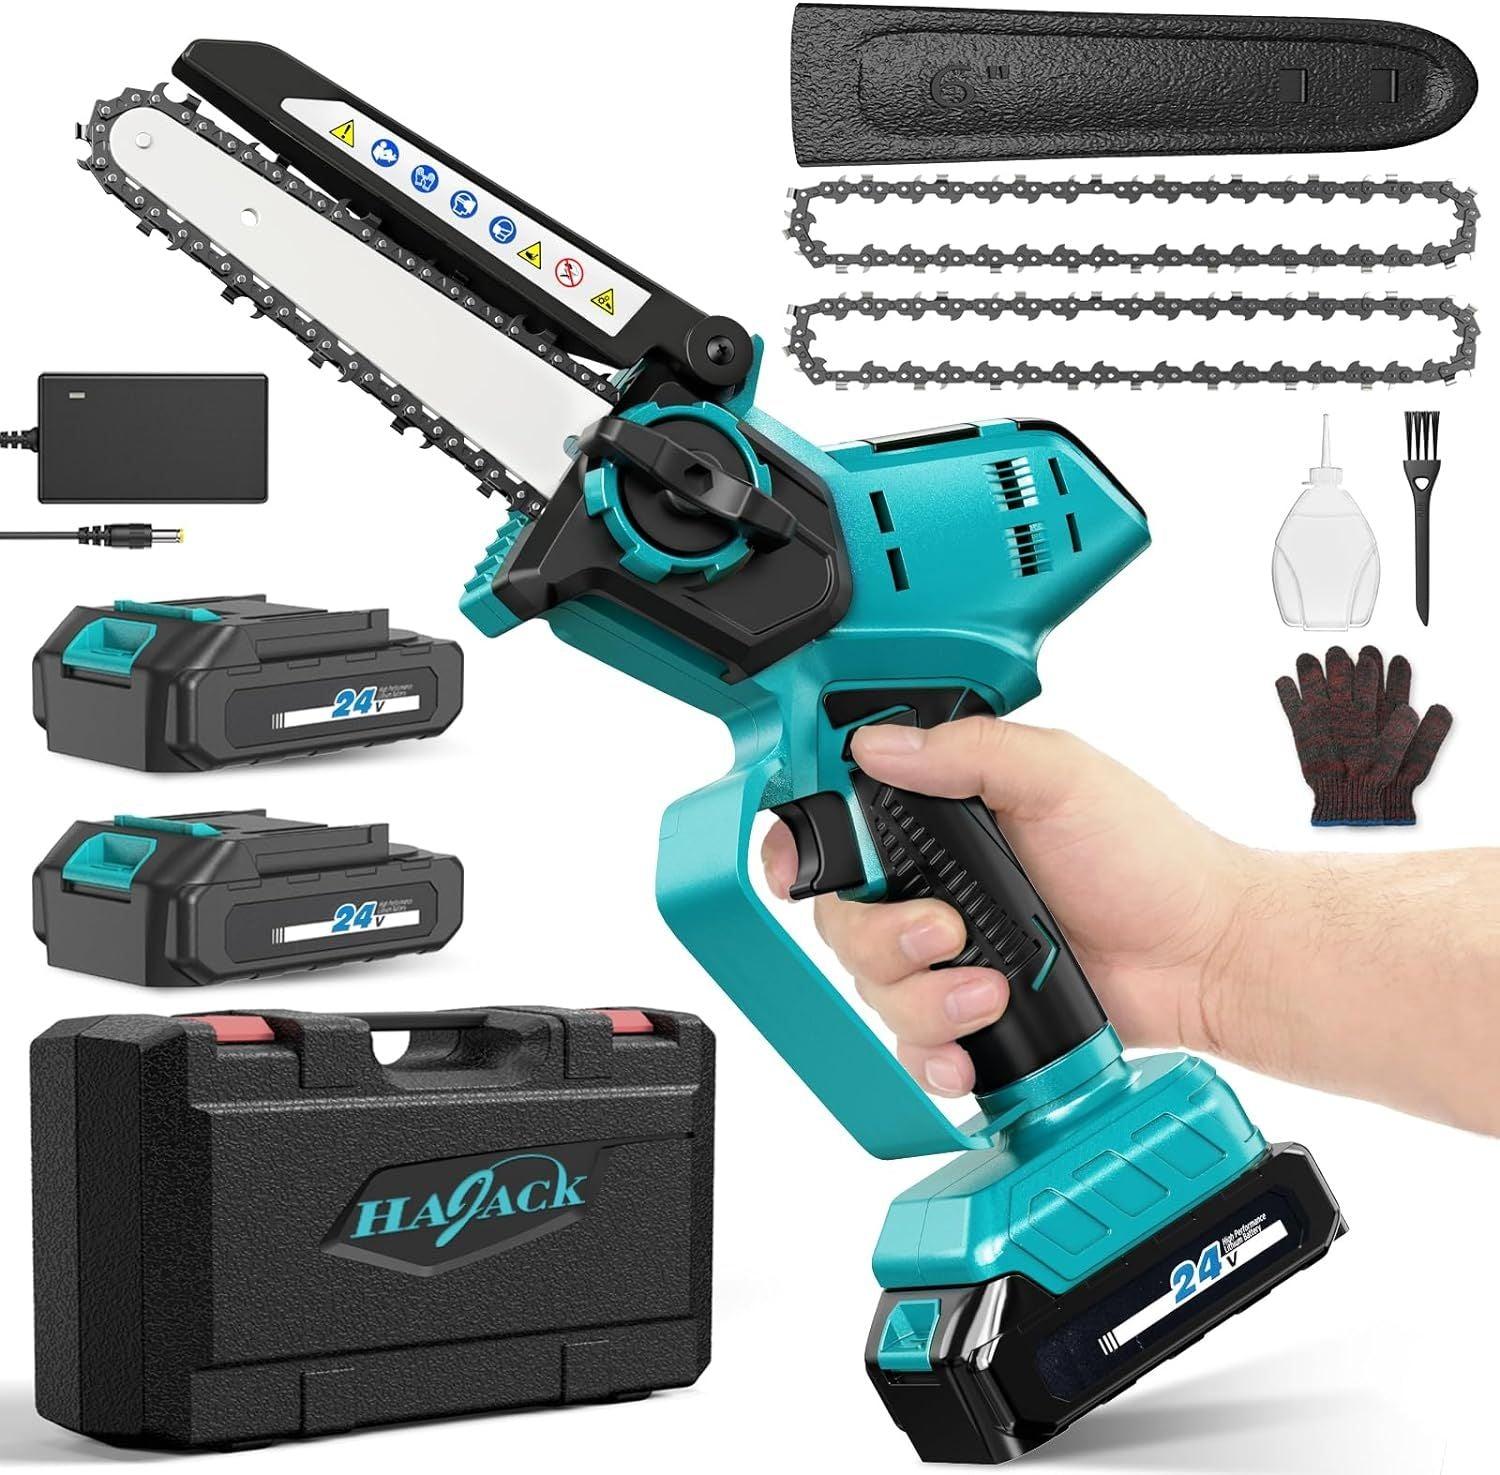 Hajack  6" Mini Electric Chainsaw (NY199) - Teal/Black - Excellent